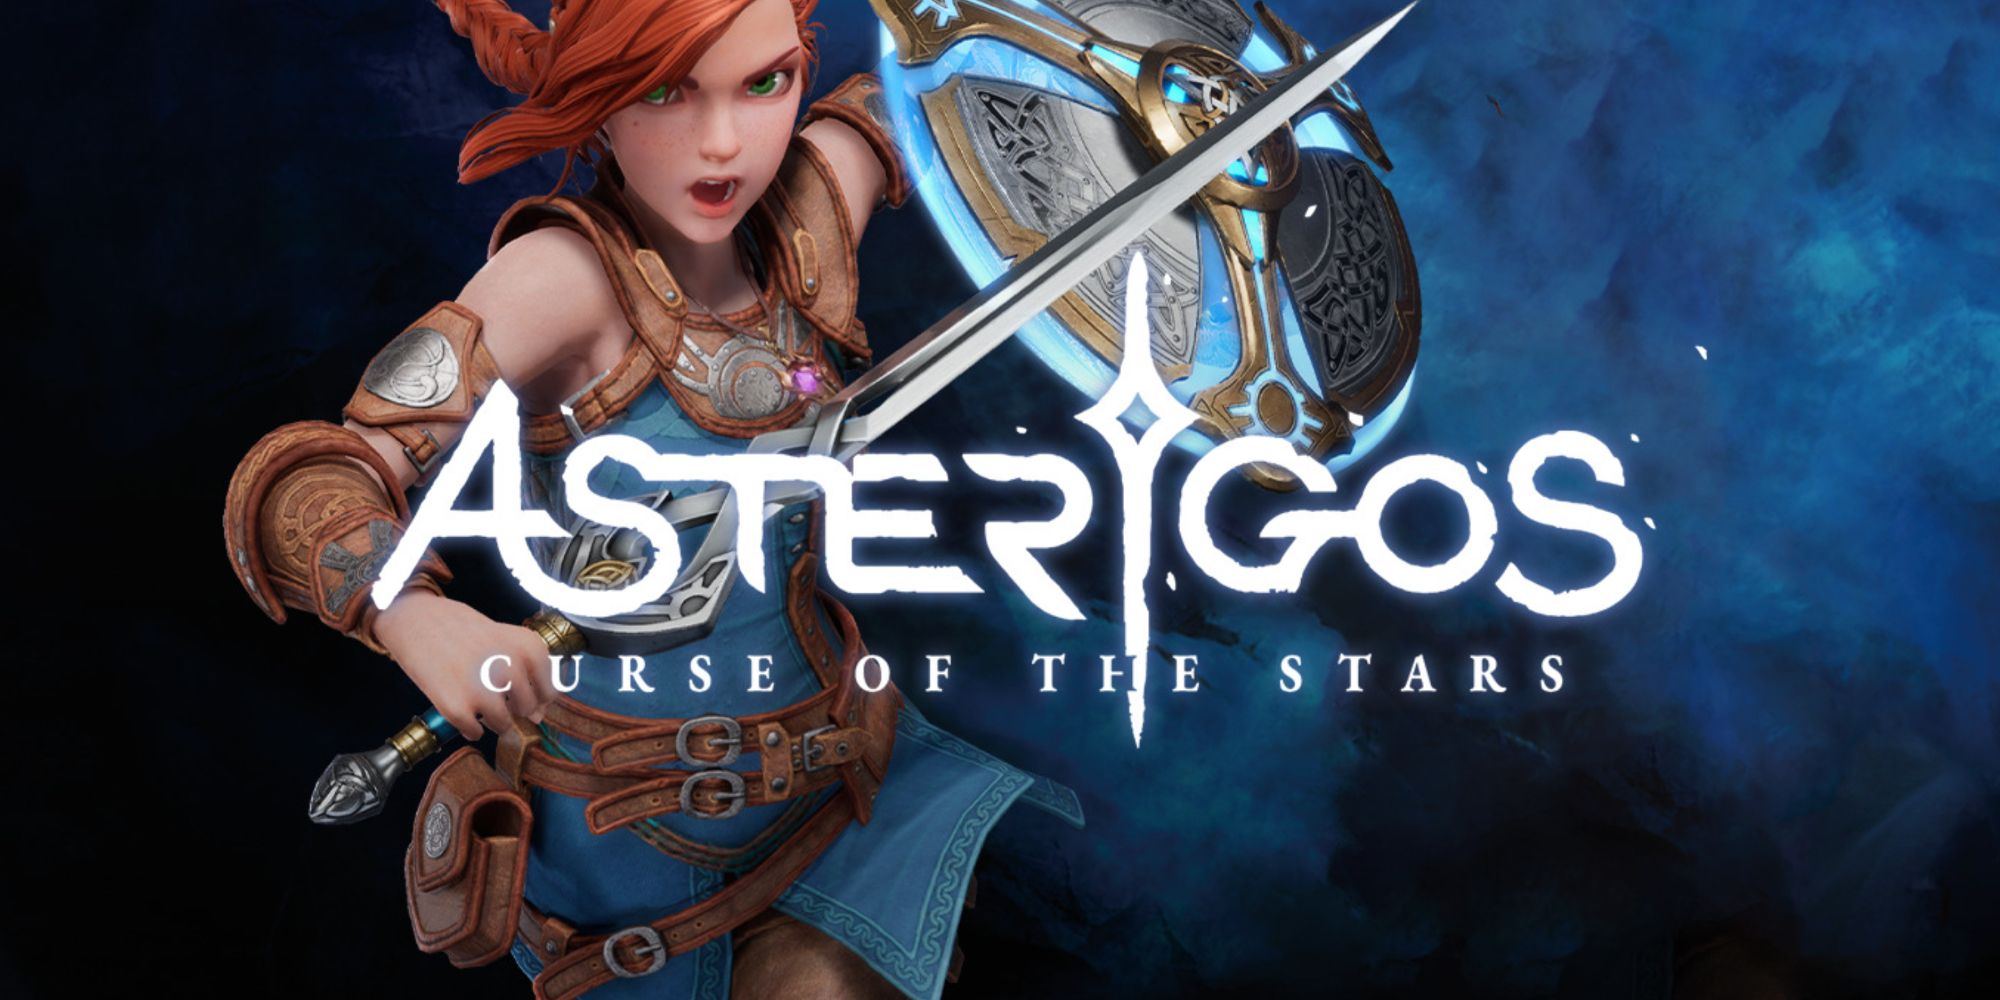 download Asterigos: Curse of the Stars